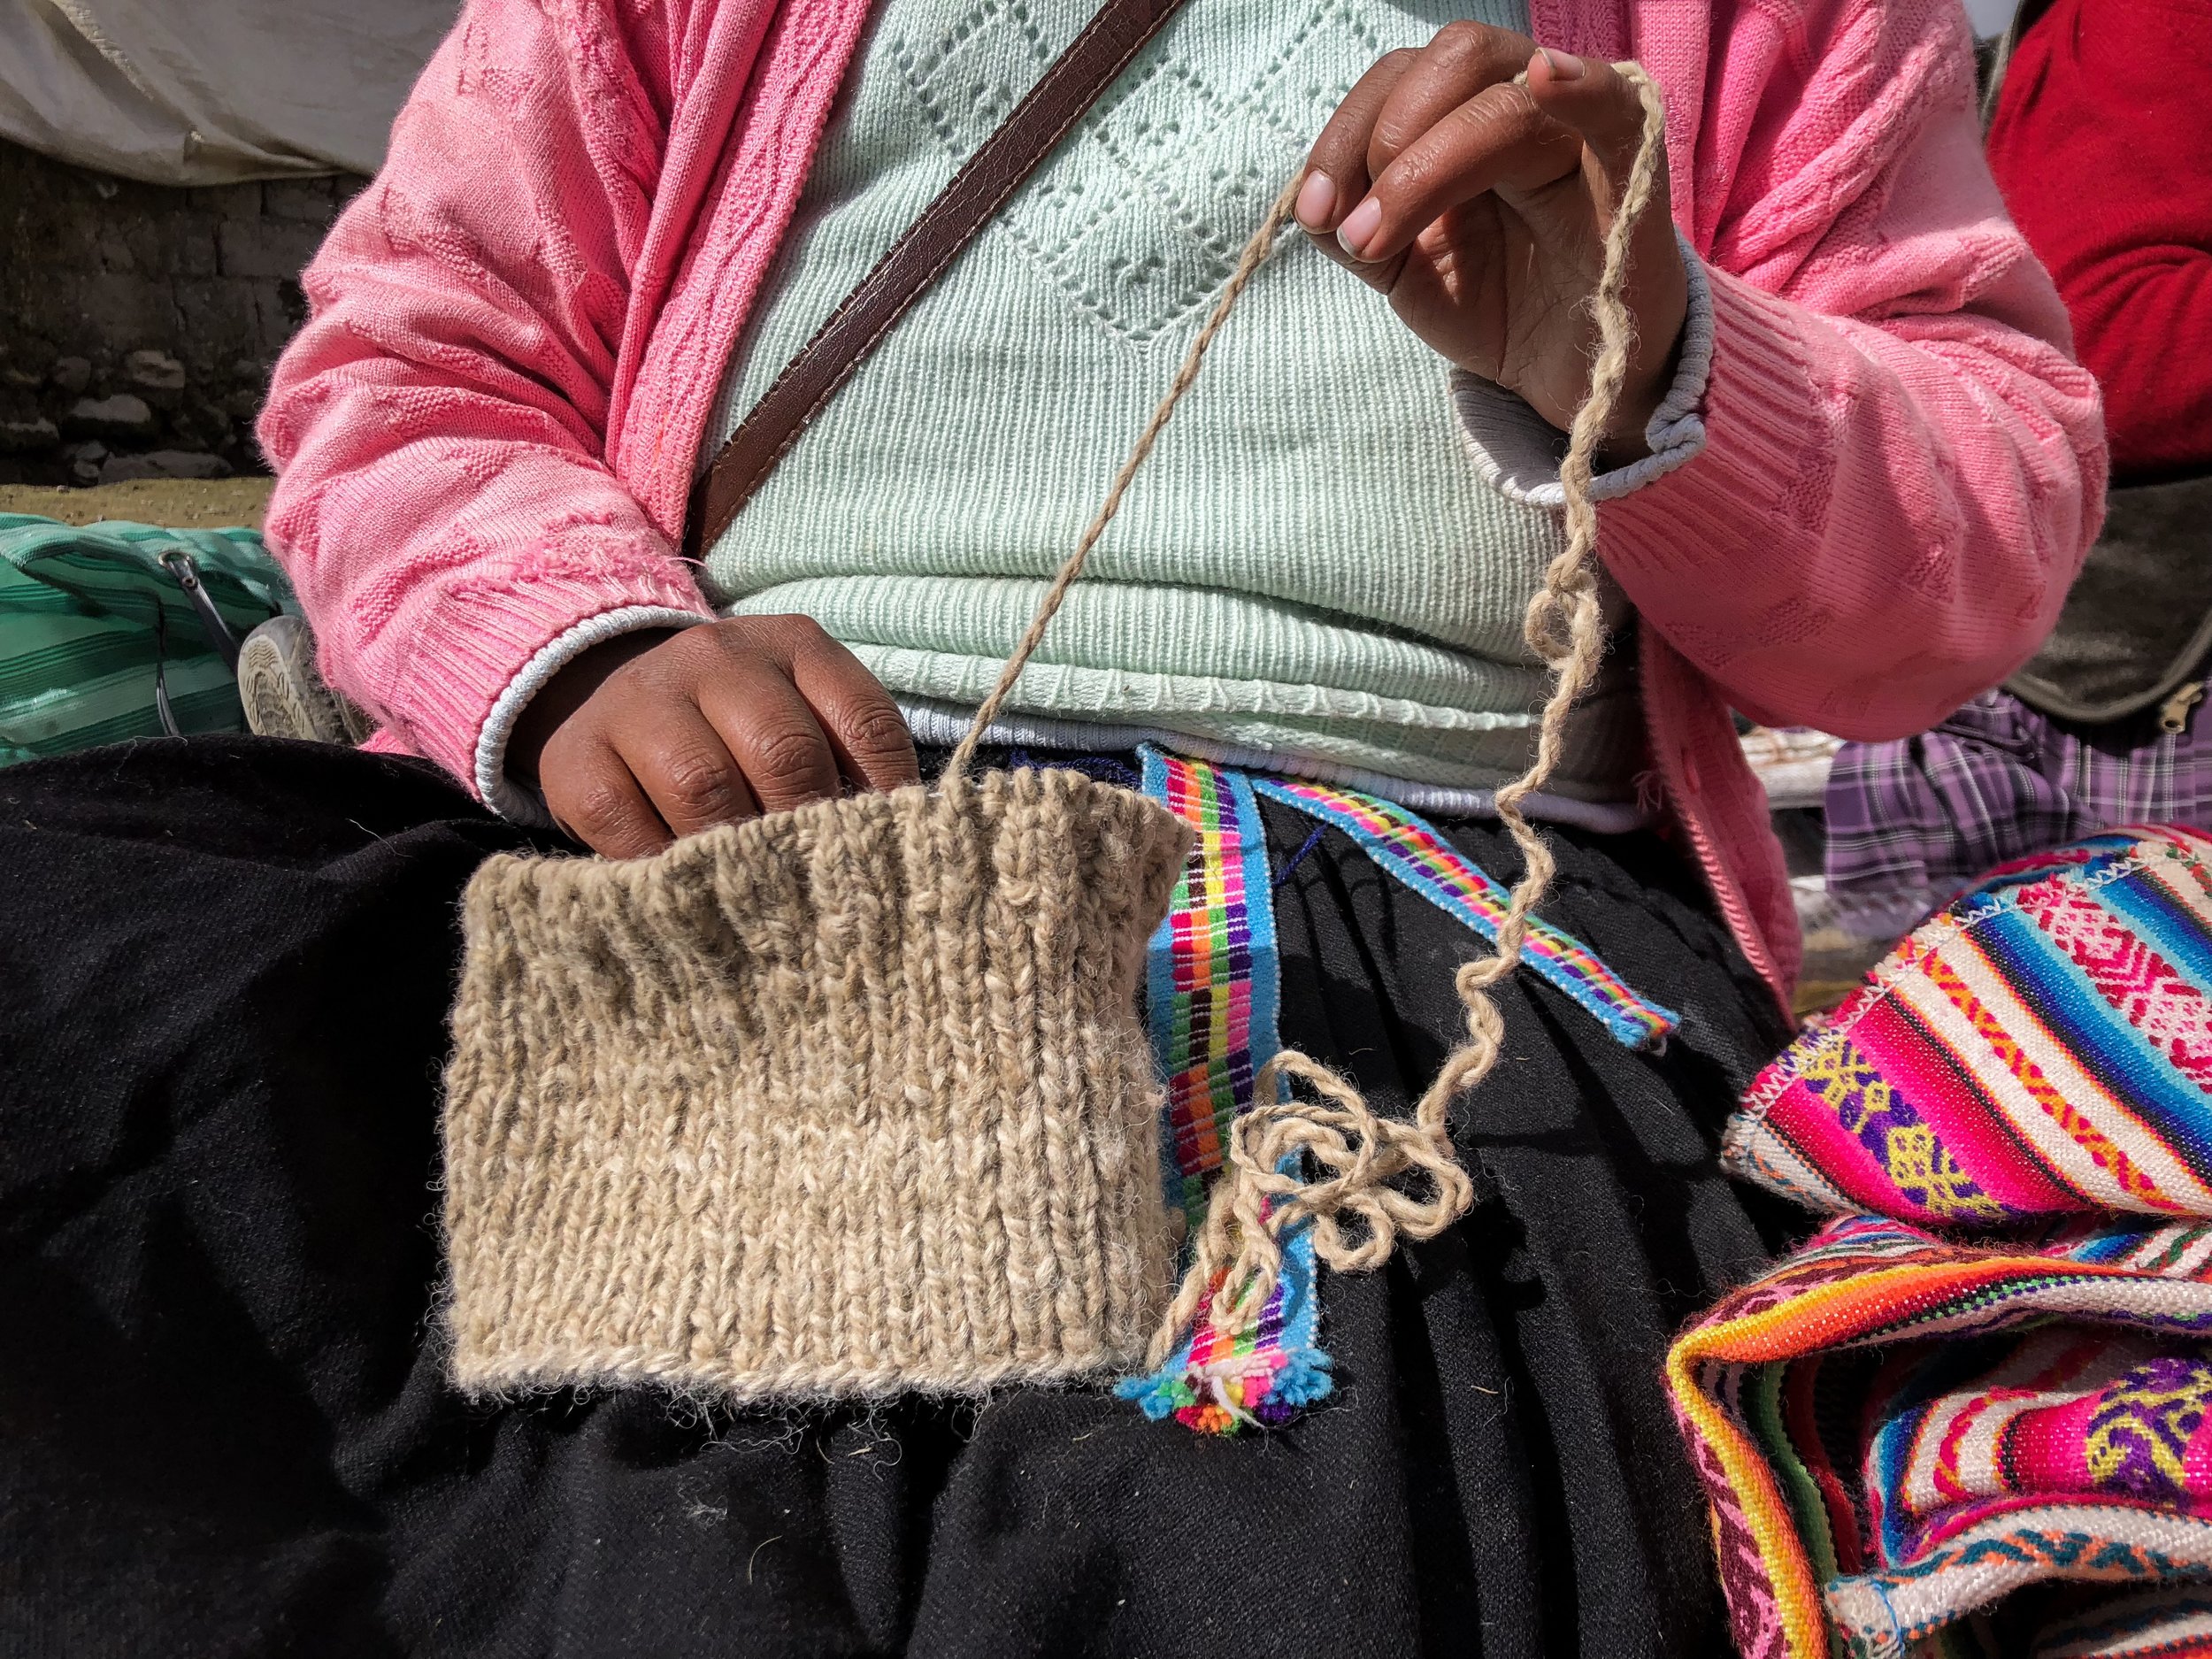 Hand spinning yarn &amp; knitting takes hours, and is a daily routine for artisans in the Andes.